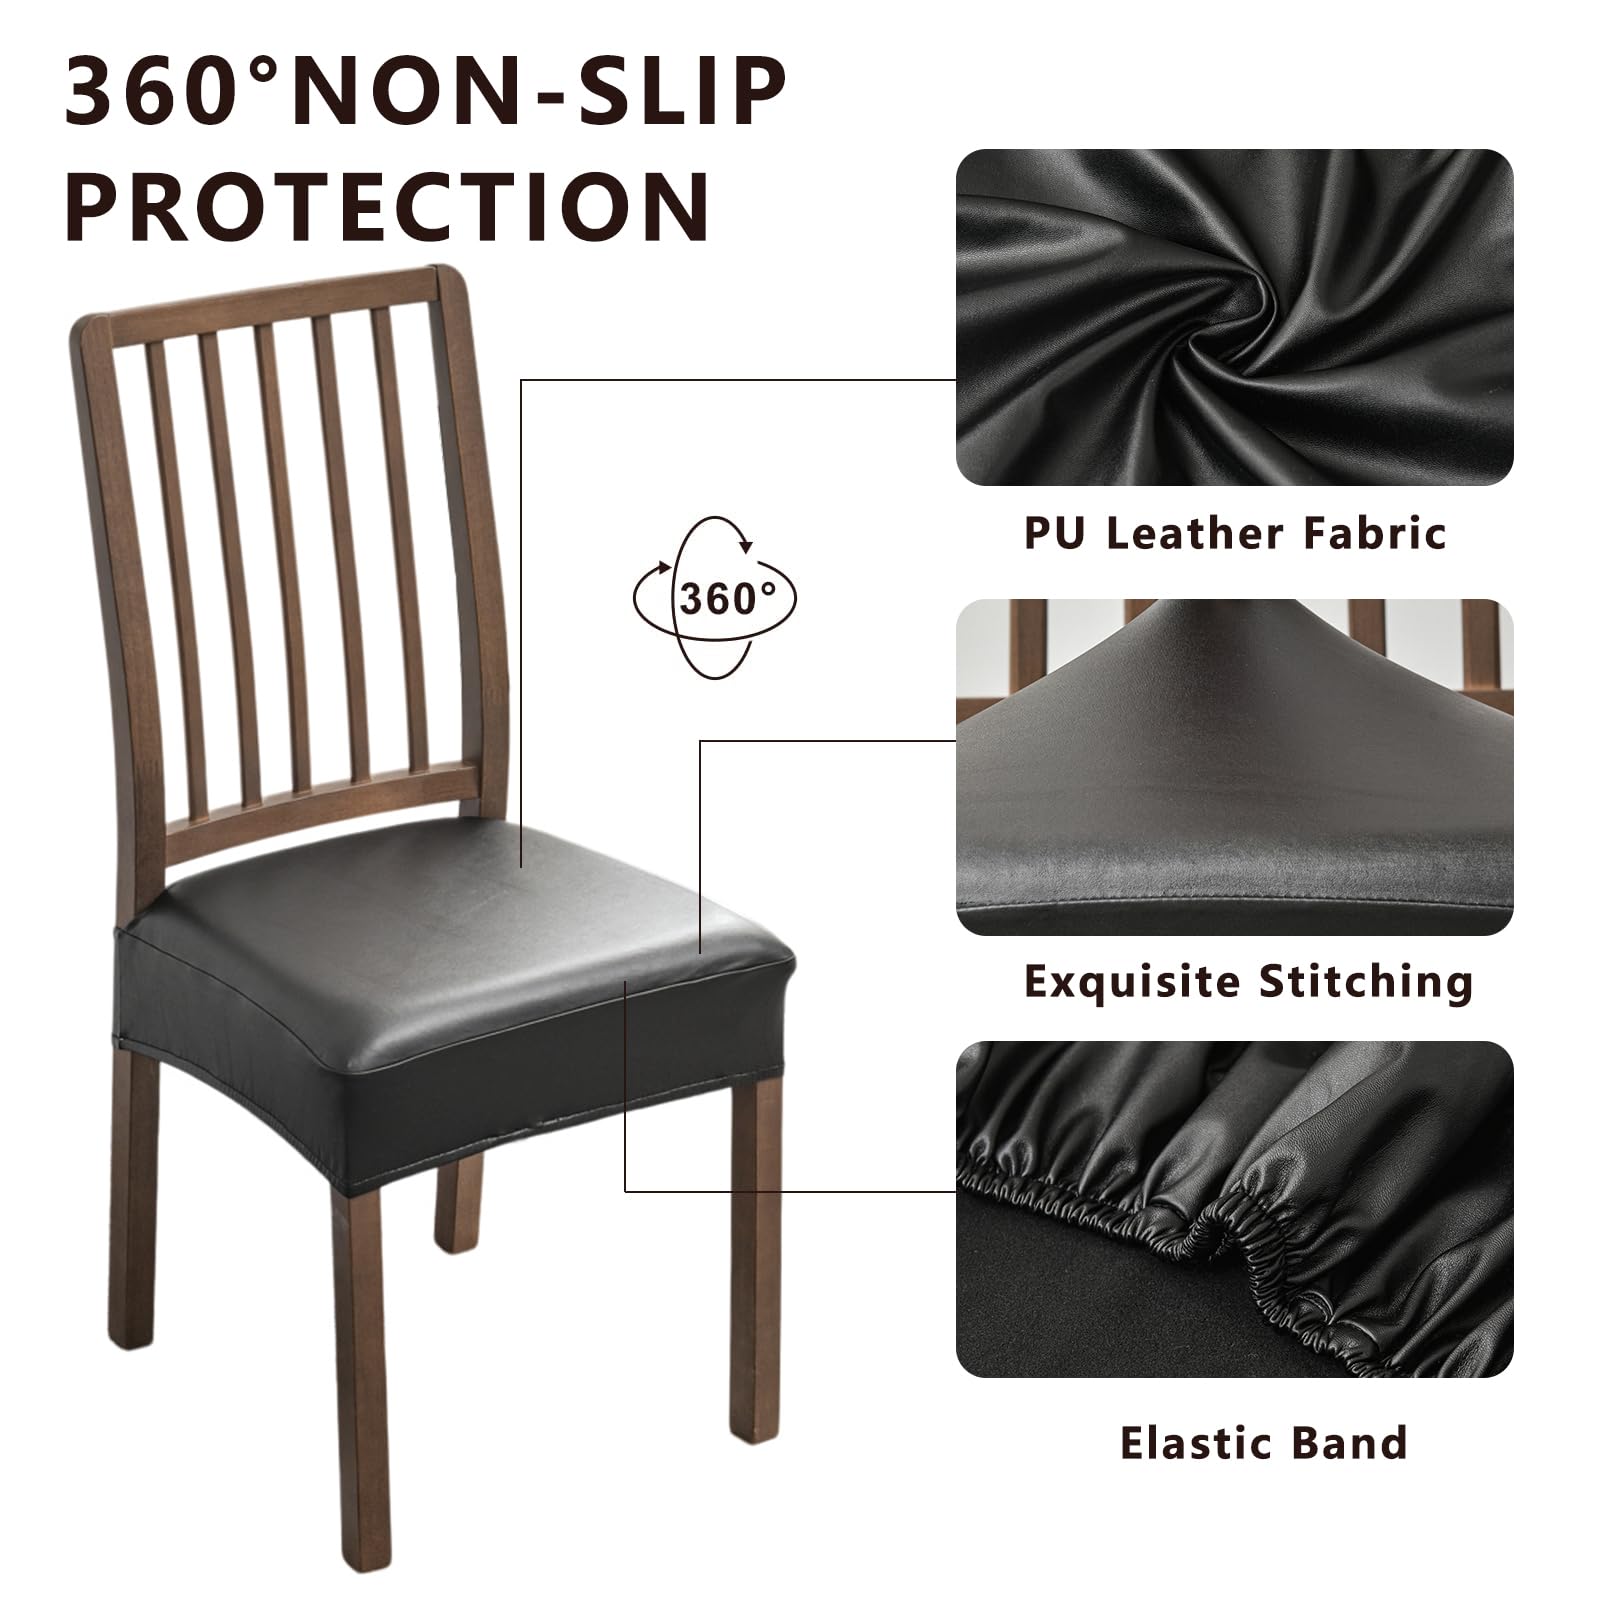 NILUOH Waterproof Seat Covers for Dining Room Chairs Set of 2, Pu Leather Chair Seat Slipcovers Dining Chair Cover Removable Washable Chair Protctor Cover, Rear Covers (PU-Black)